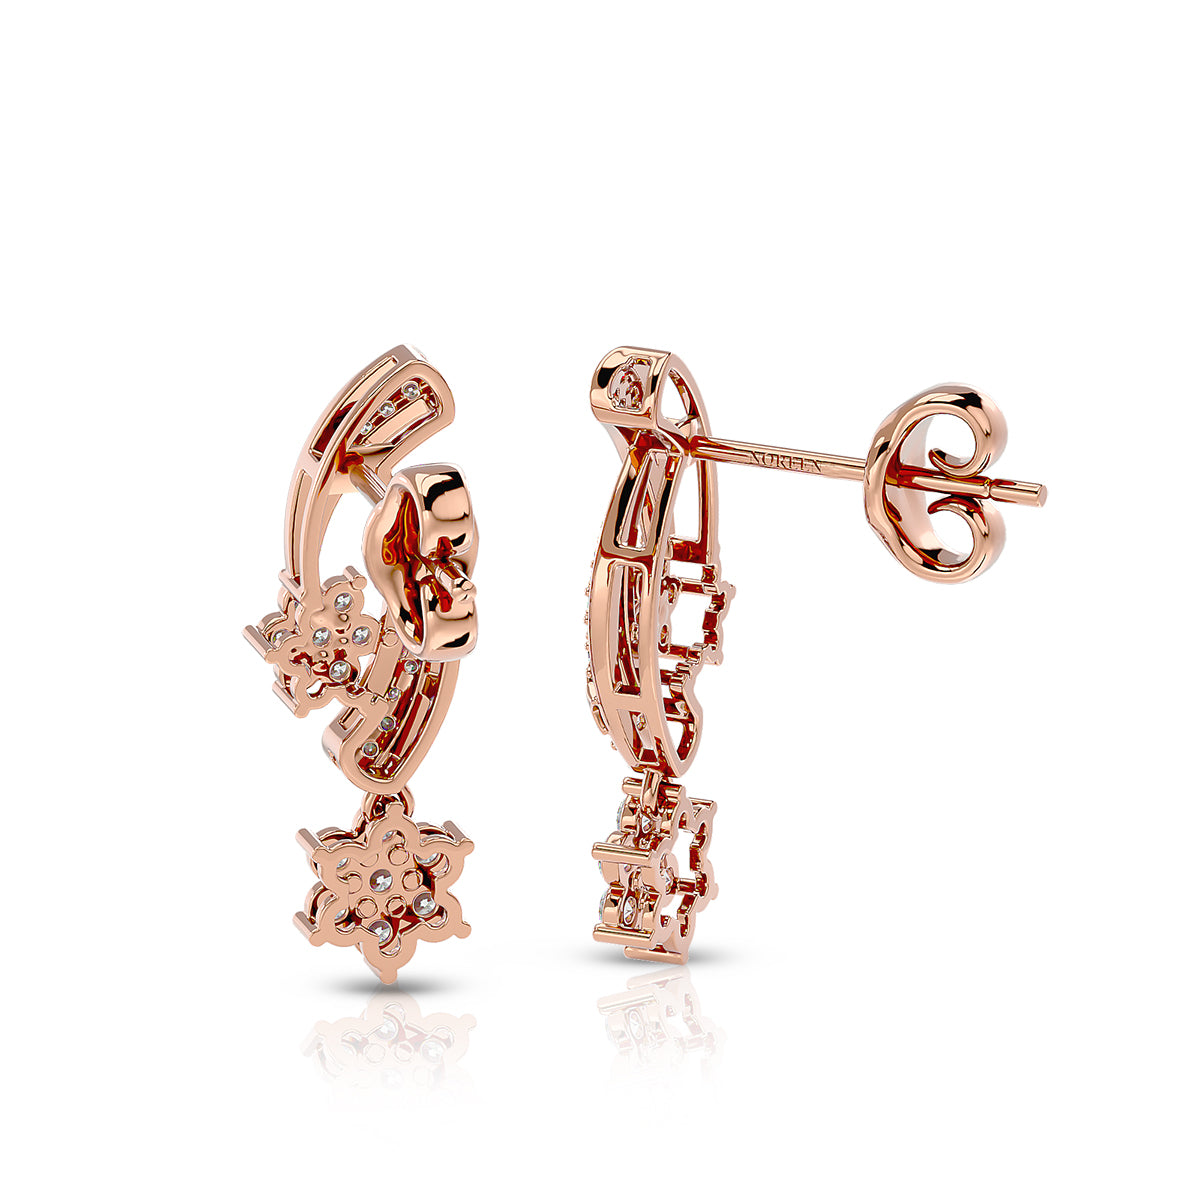 Persona Earrings 18K Rose Gold With Diamonds